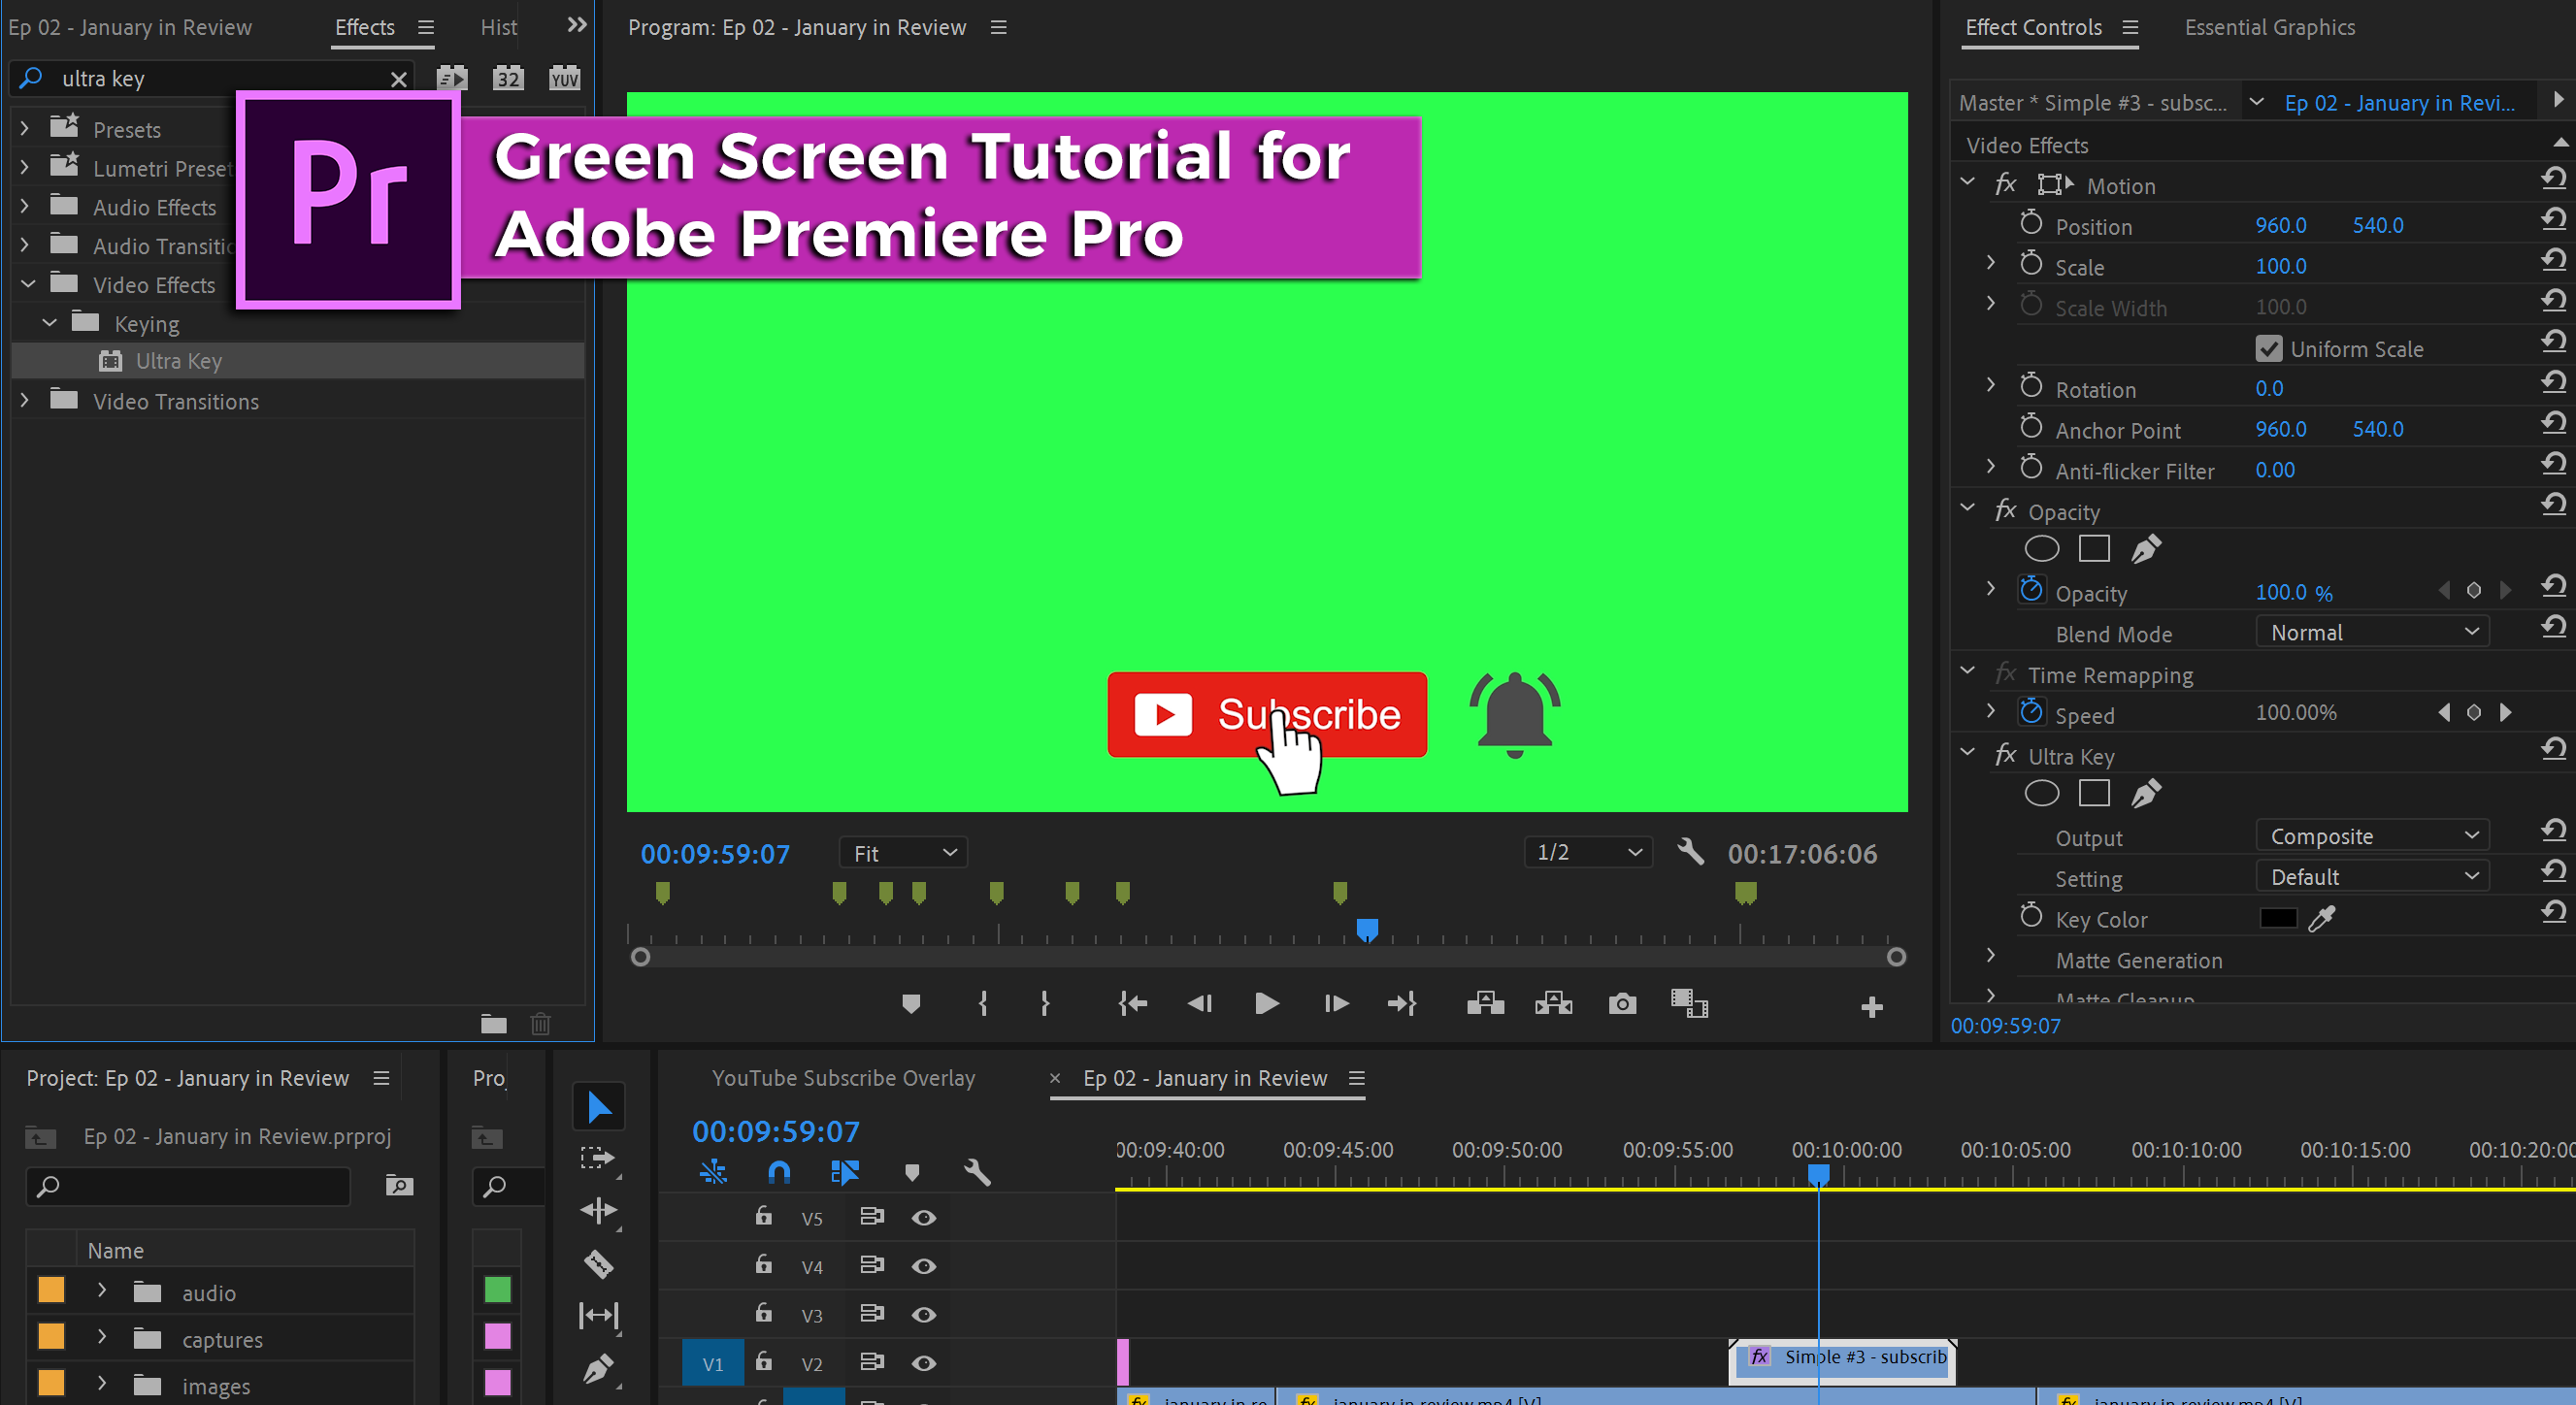 Green screen and chroma key effect tutorial for Adobe Premiere Pro